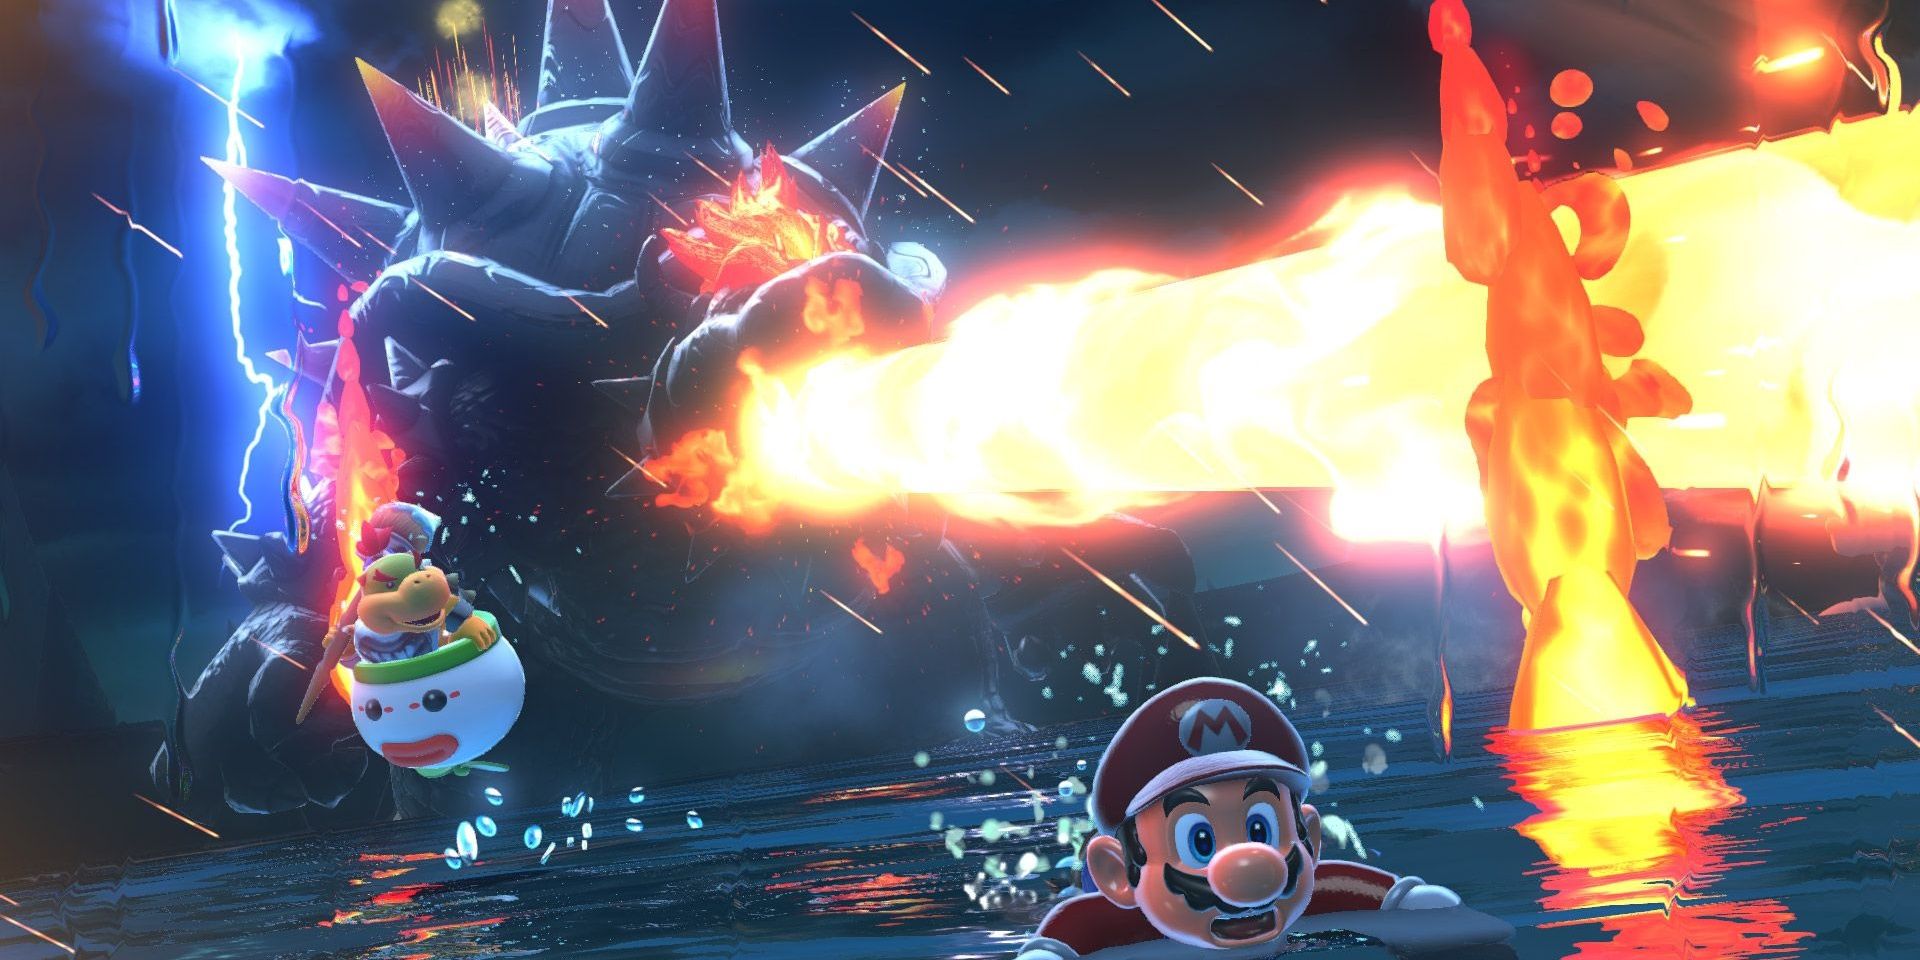 Bowser shooting fire at Mario in Bowser's Fury